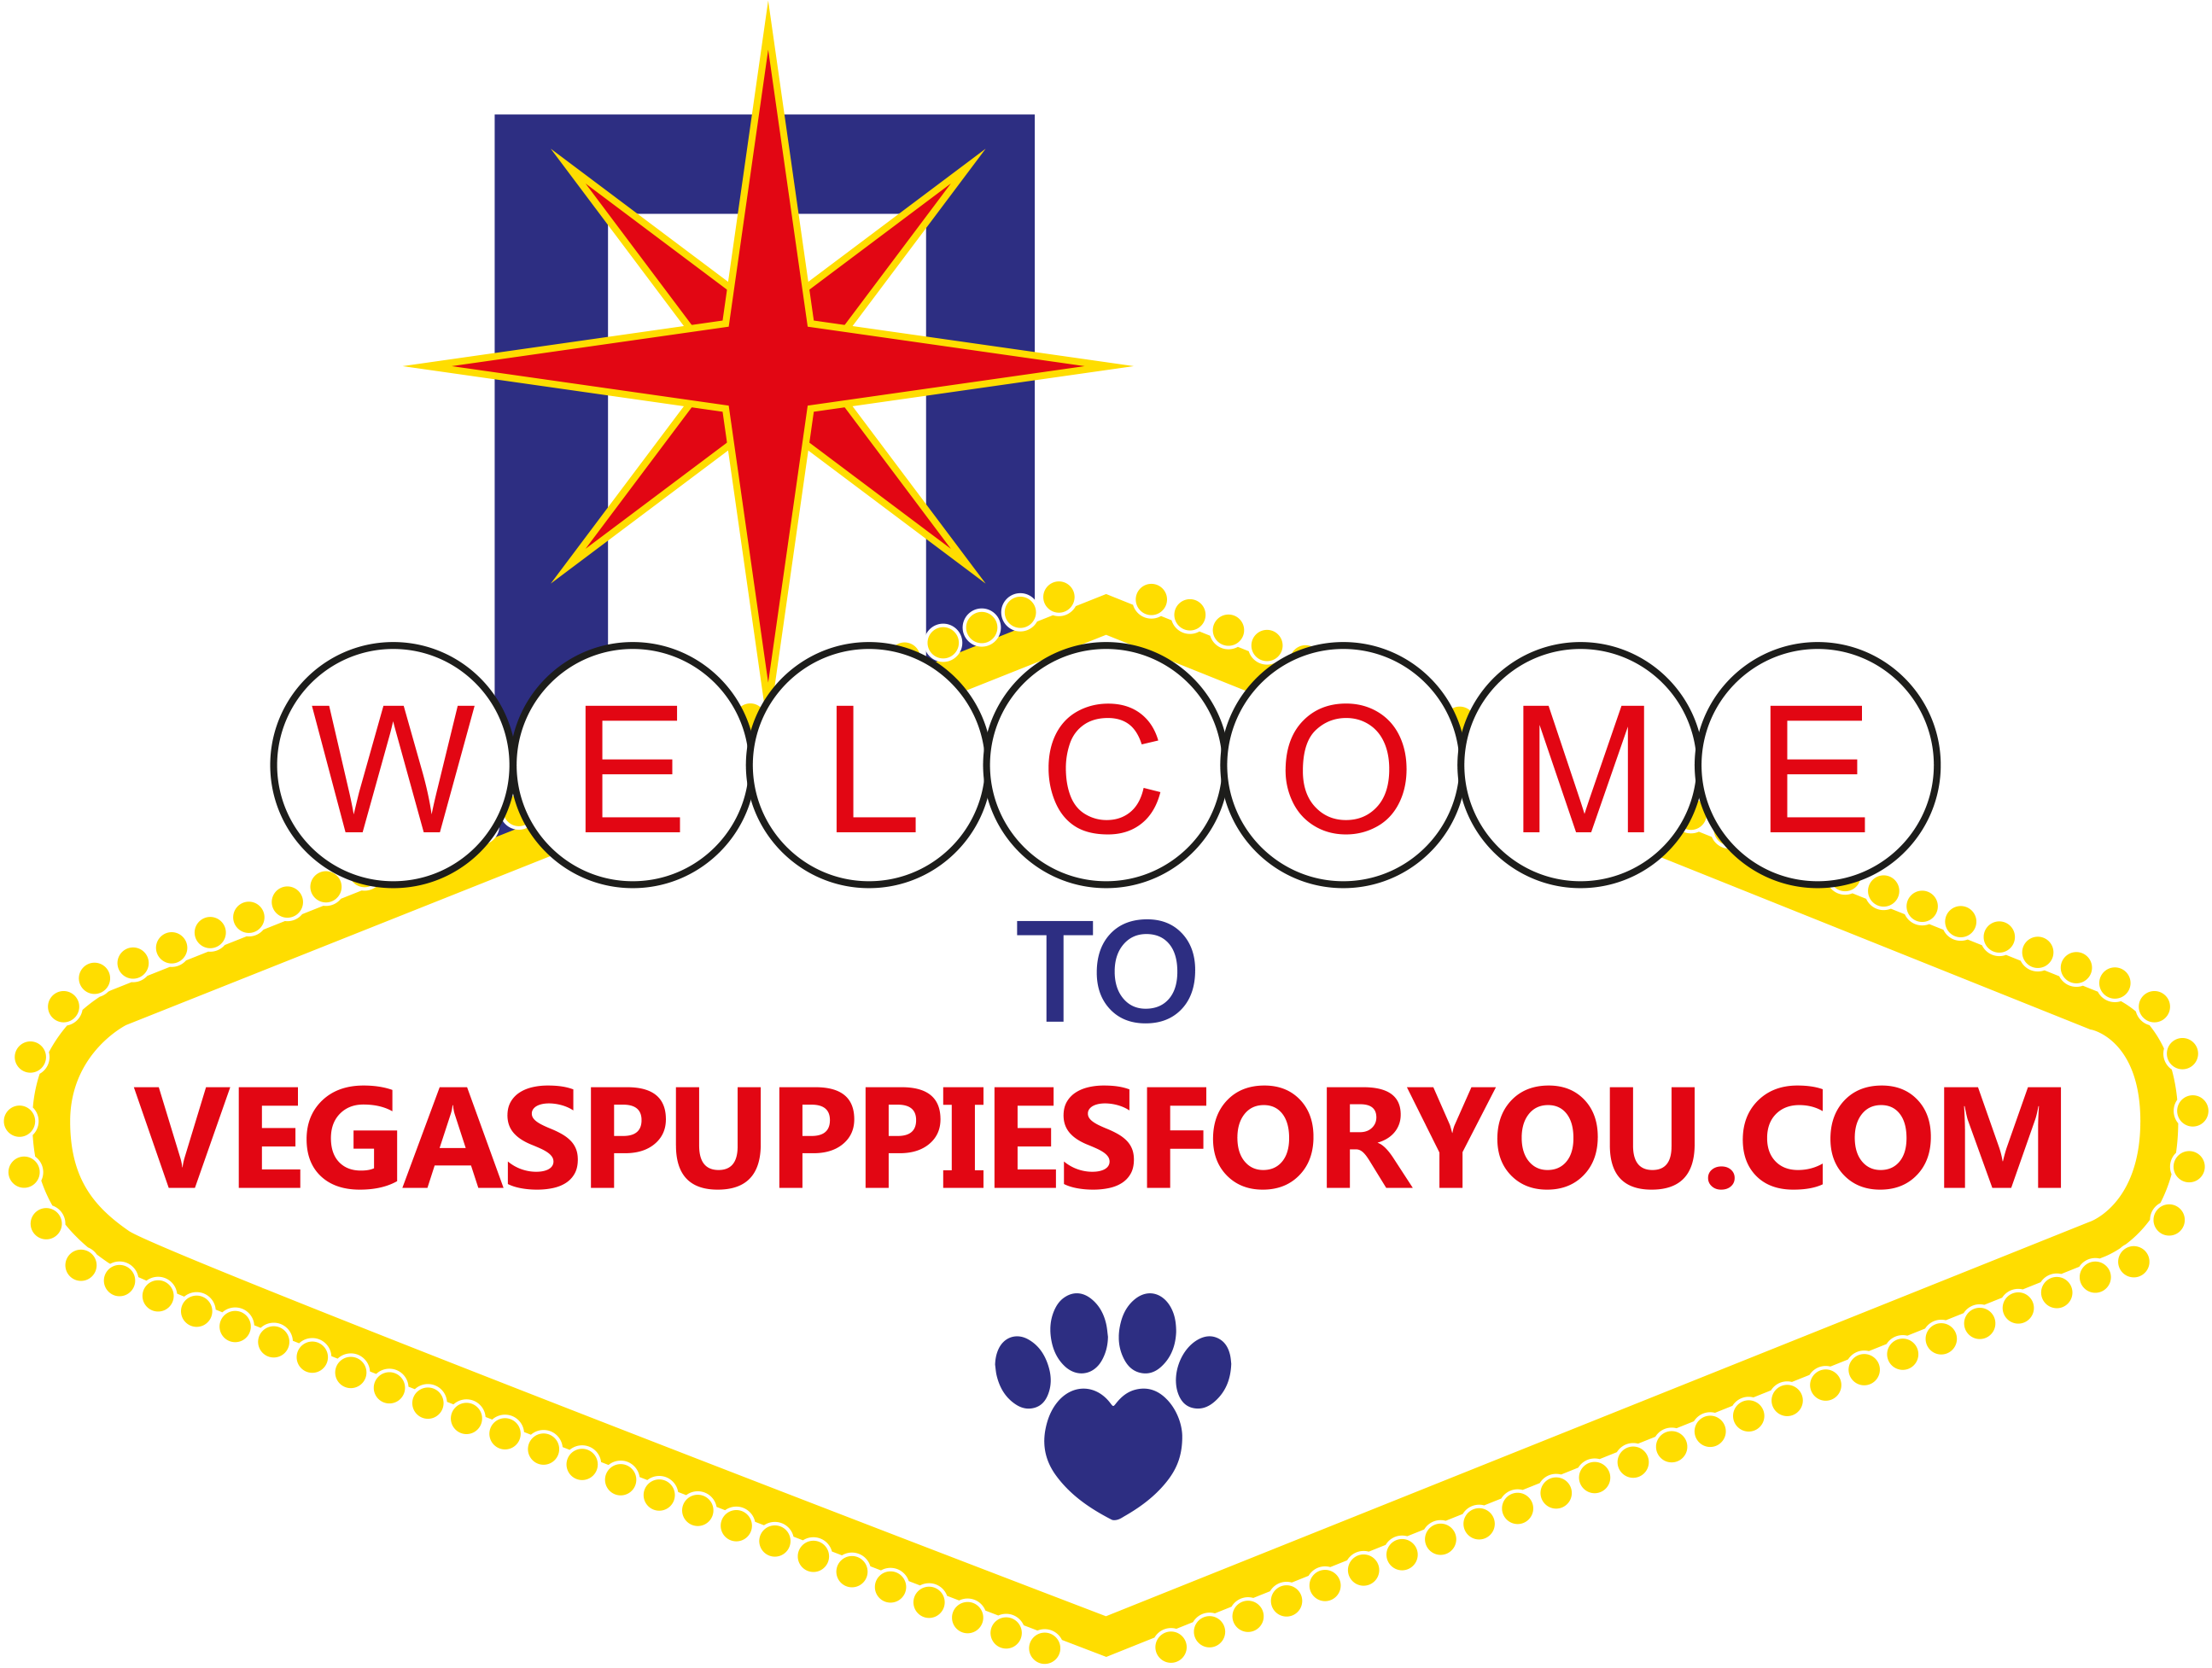 Vegas Puppies For You